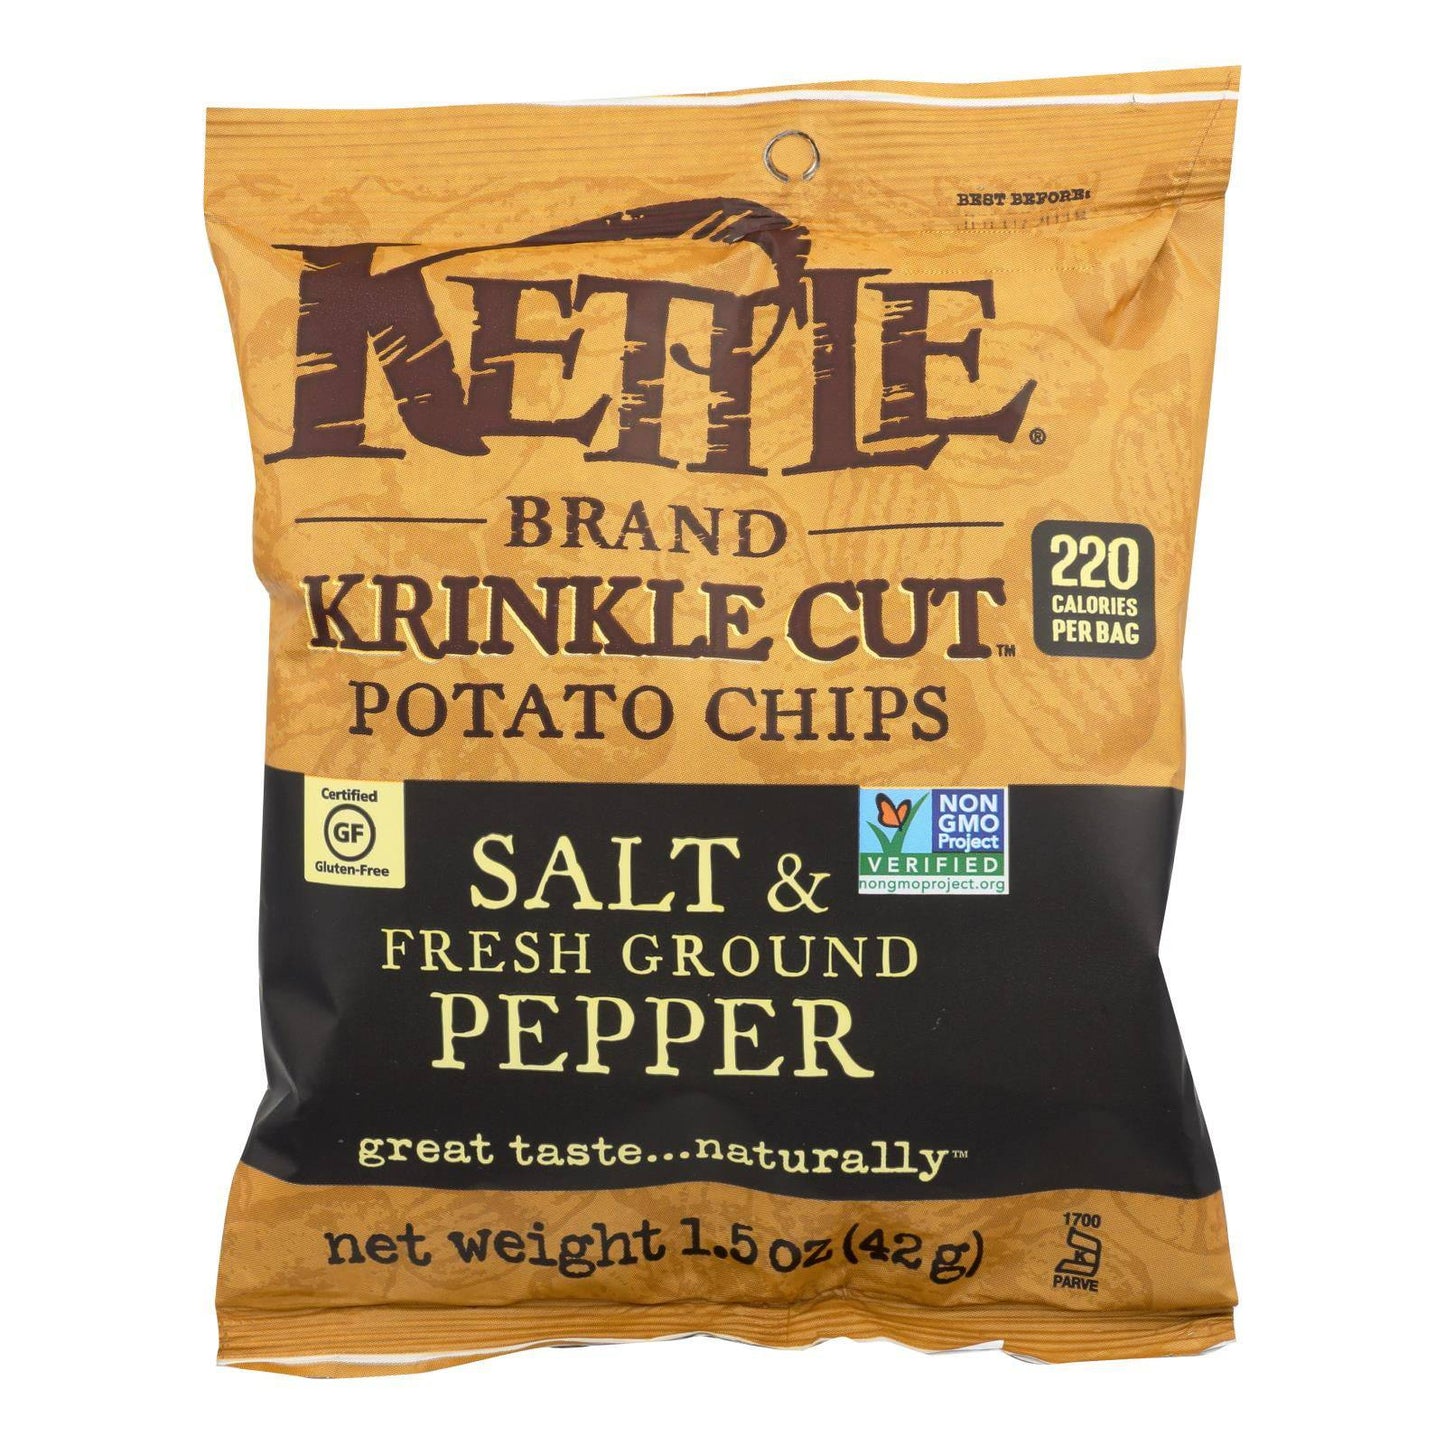 Buy Kettle Brand Potato Chips - Sea Salt And Crushed Black Pepper - Case Of 24 - 1.5 Oz.  at OnlyNaturals.us